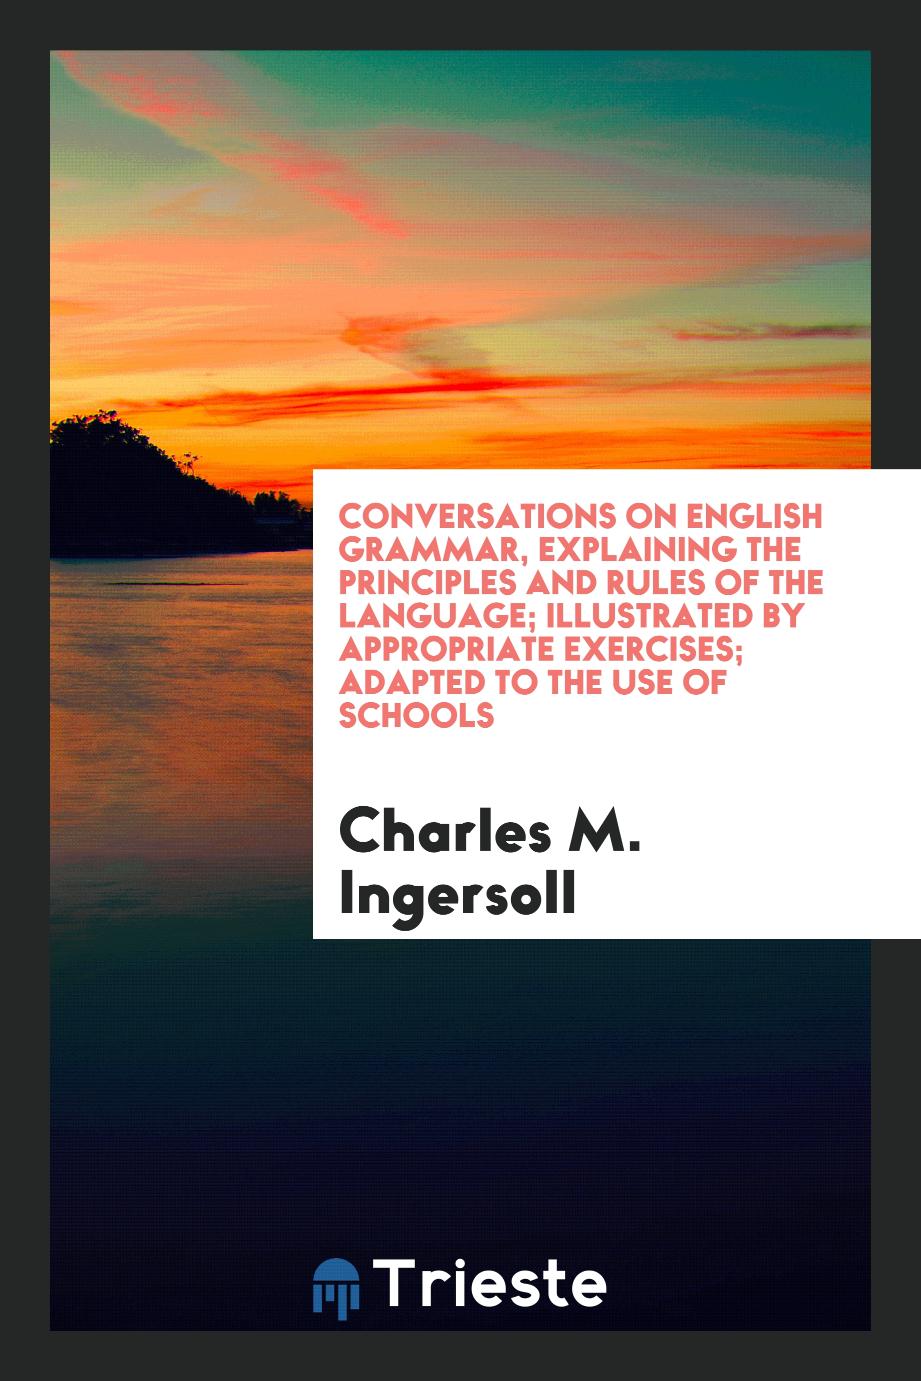 Conversations on English grammar, explaining the principles and rules of the language; illustrated by appropriate exercises; adapted to the use of schools